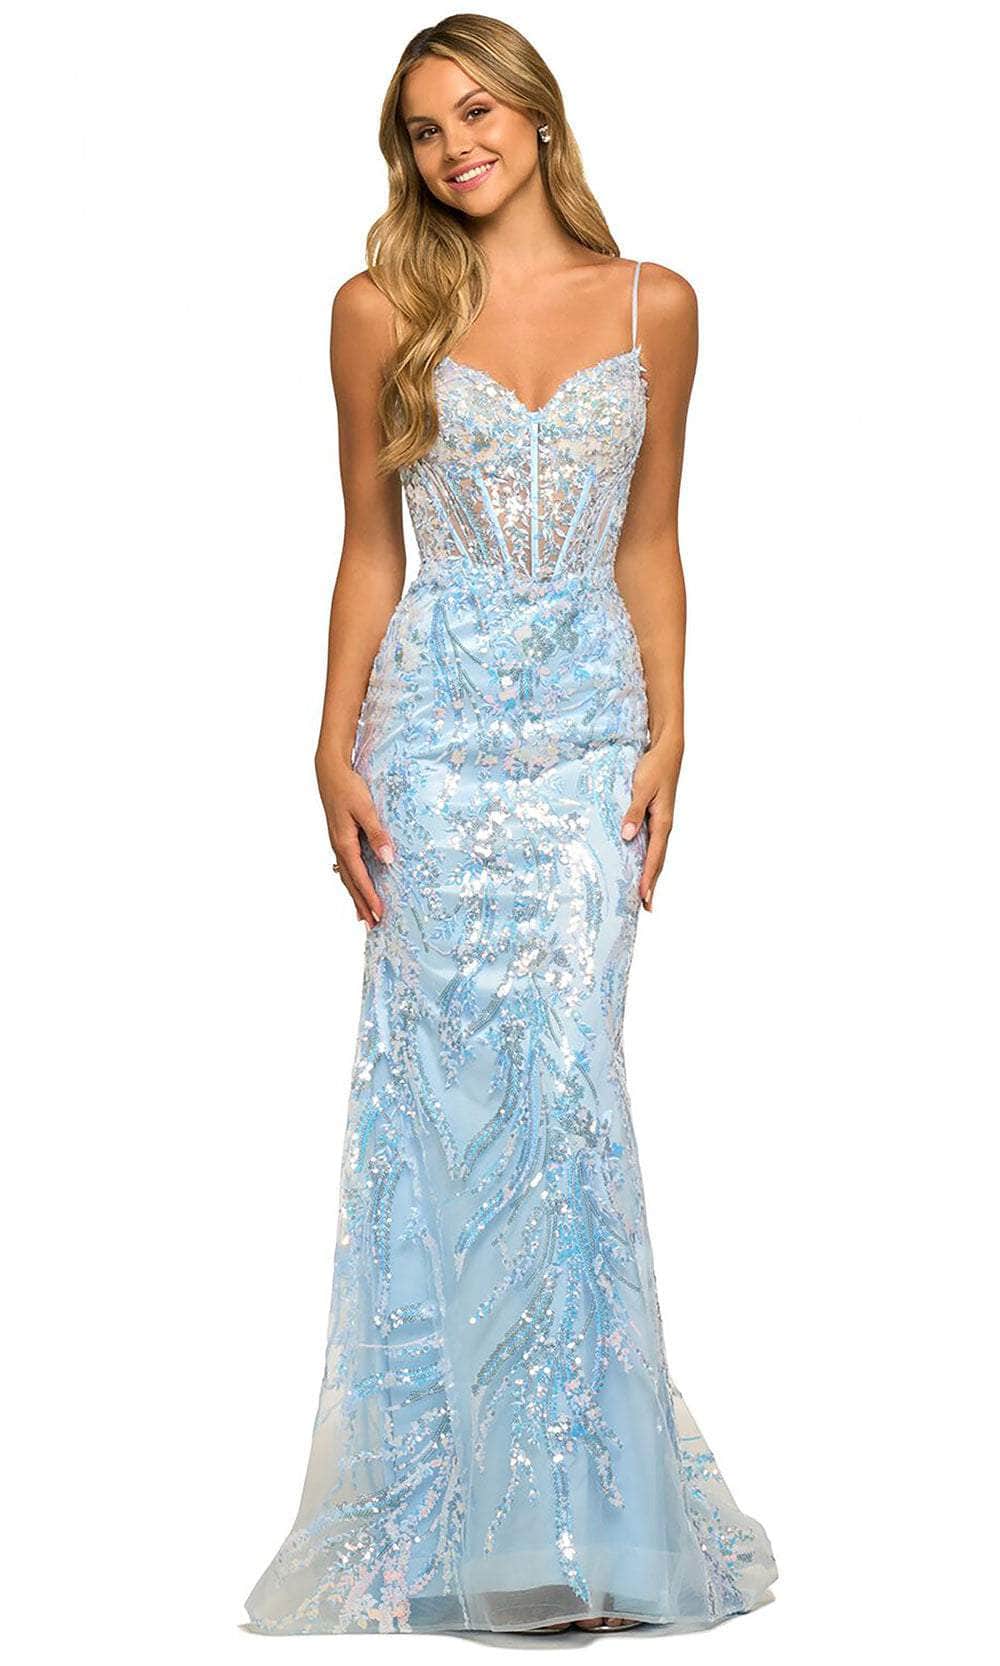 Image of Sherri Hill 55502 - Sweetheart Corset Sequin Prom Gown